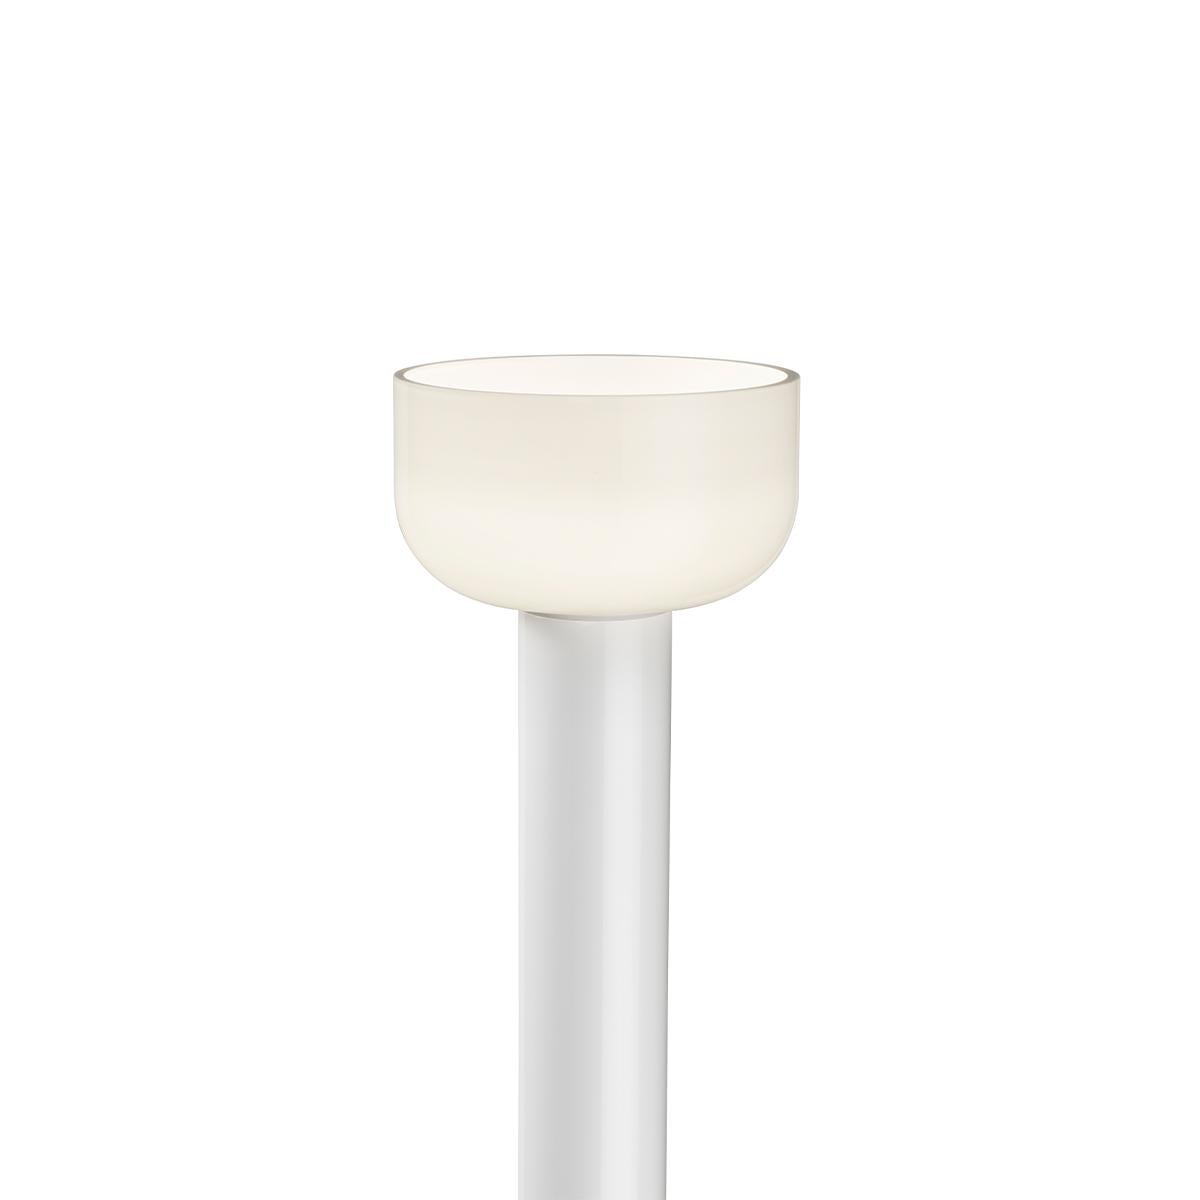 Floor lamp with indirect light. Stem in painted aluminium: shiny white, brick, cioko, green. Reflector in shiny opal white and grey blown glass. Electrical cable of 270 cm usable length with foot dimmer switch for ON/OFF function and brightness